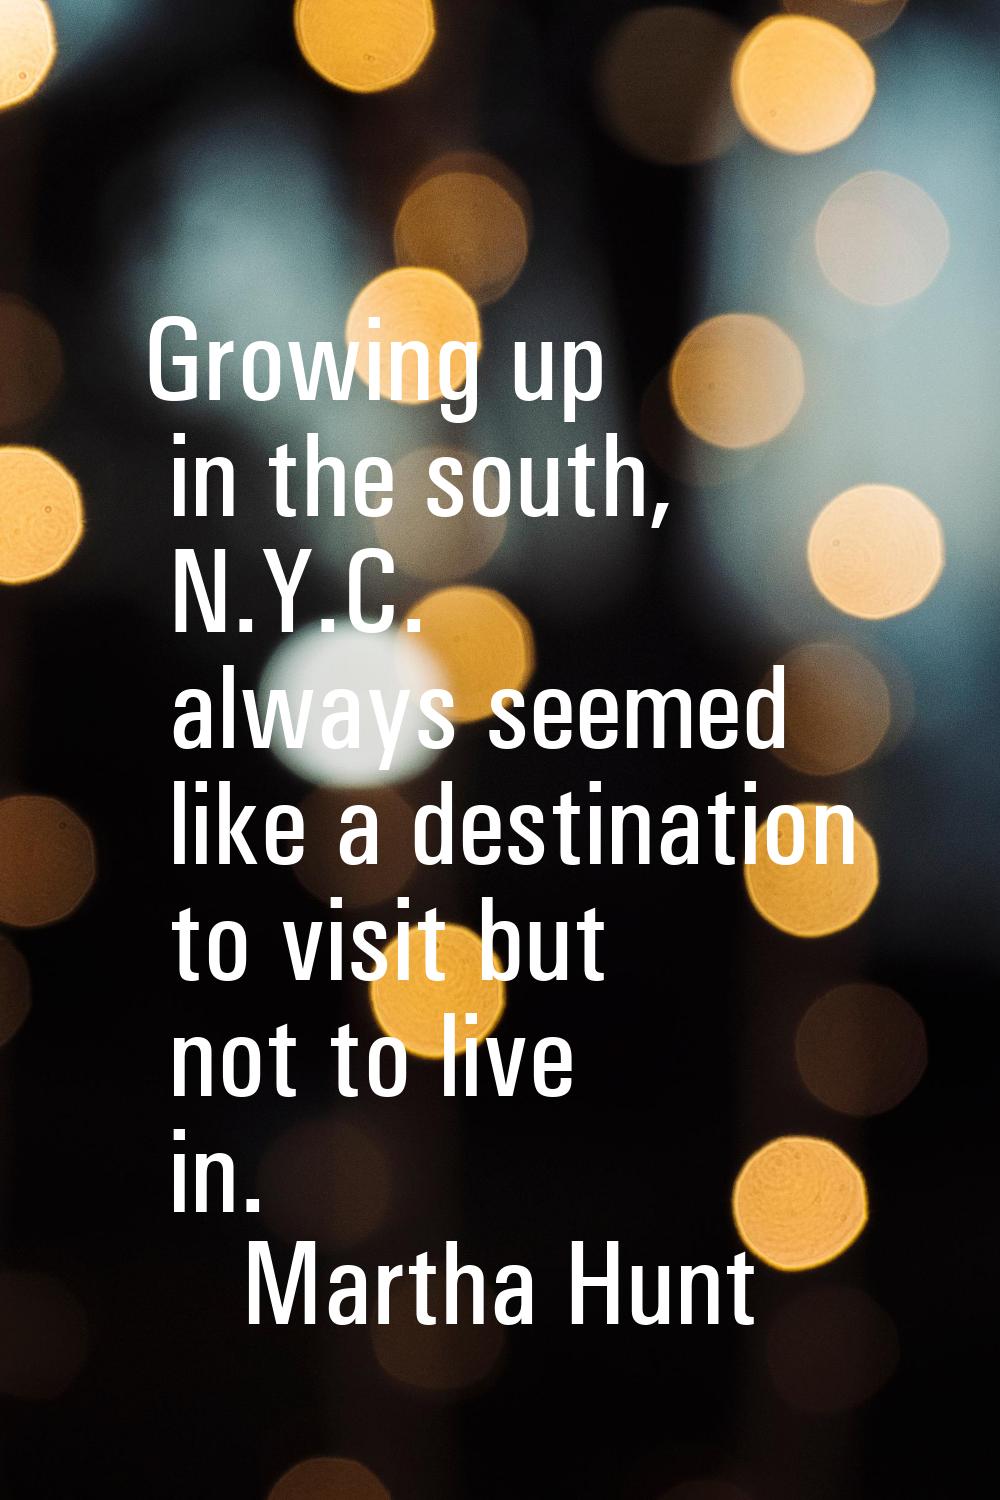 Growing up in the south, N.Y.C. always seemed like a destination to visit but not to live in.